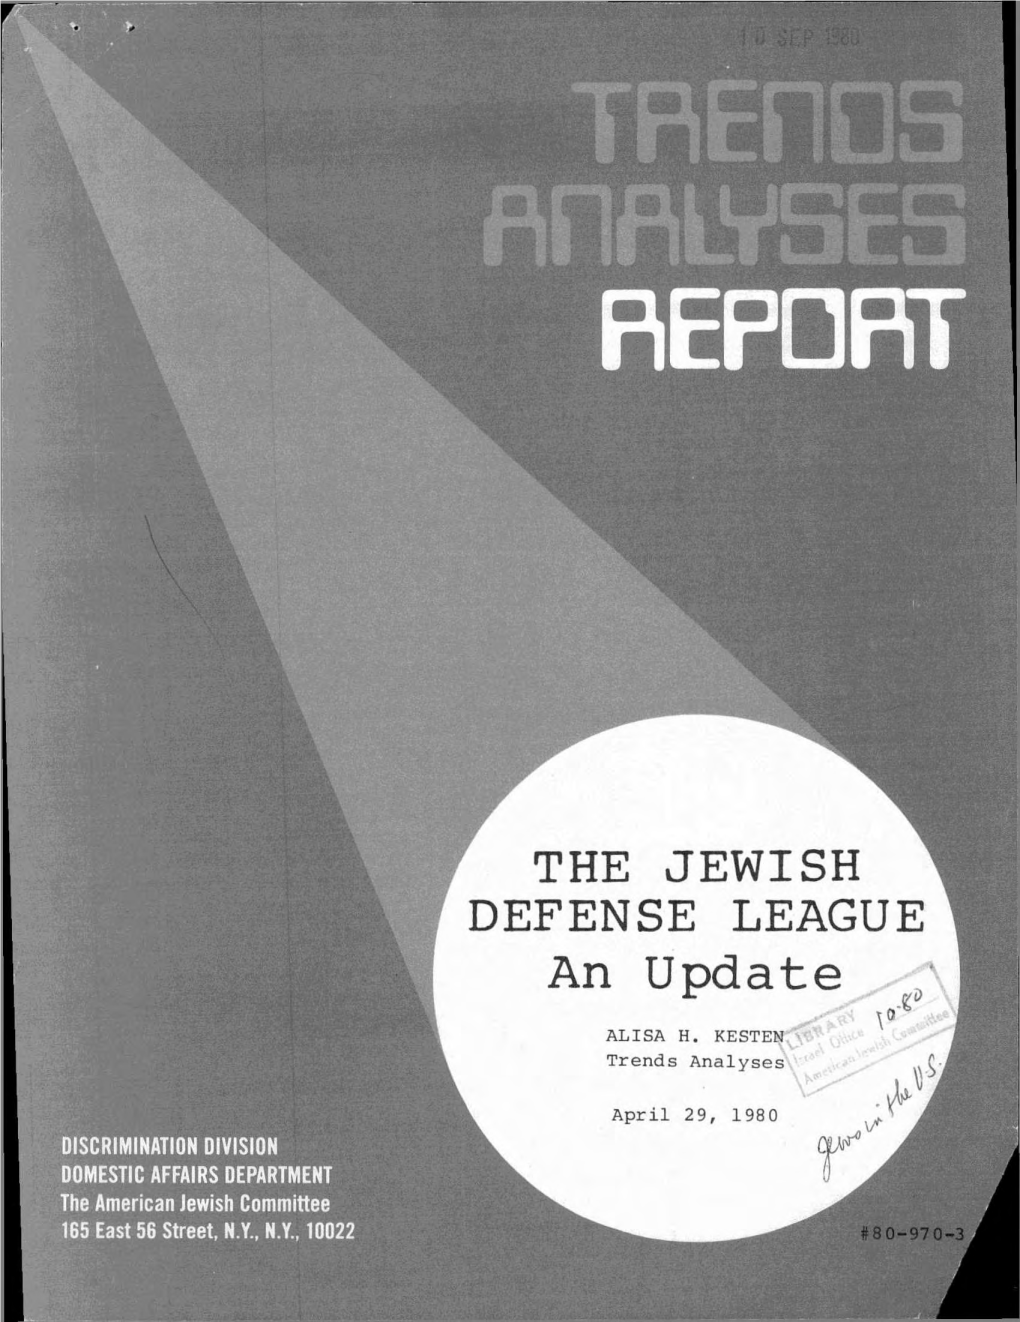 THE JEWISH DEFENSE LEAGUE an Update